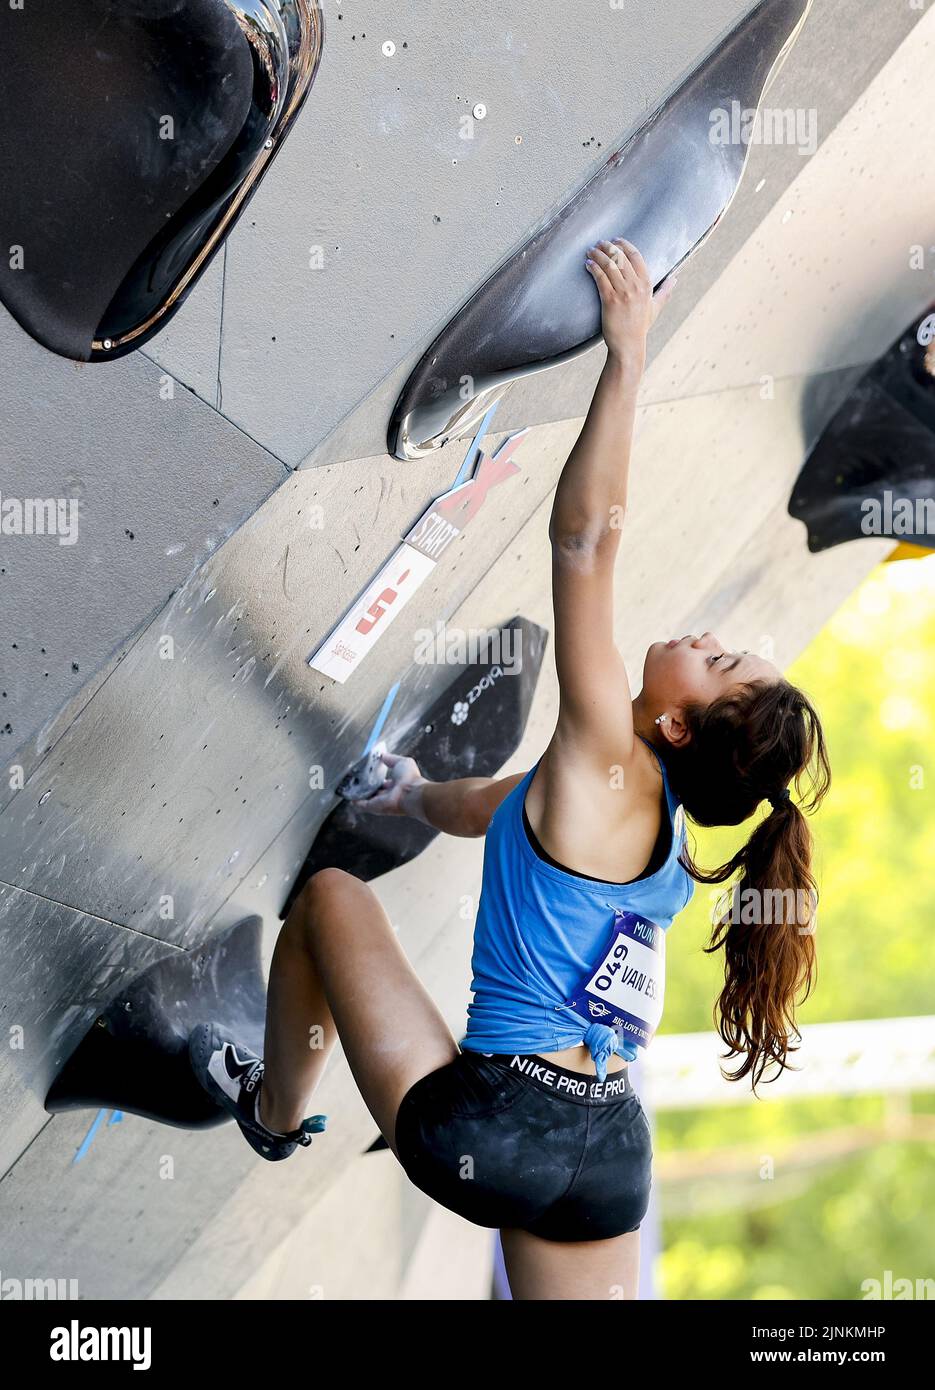 Munich, Germany. 12th Aug, 2022. MUNCHEN - Sabina van Essen in action  during the boulder (m) section of climbing on the second day of the  Multi-European Championship. The German city of Munich